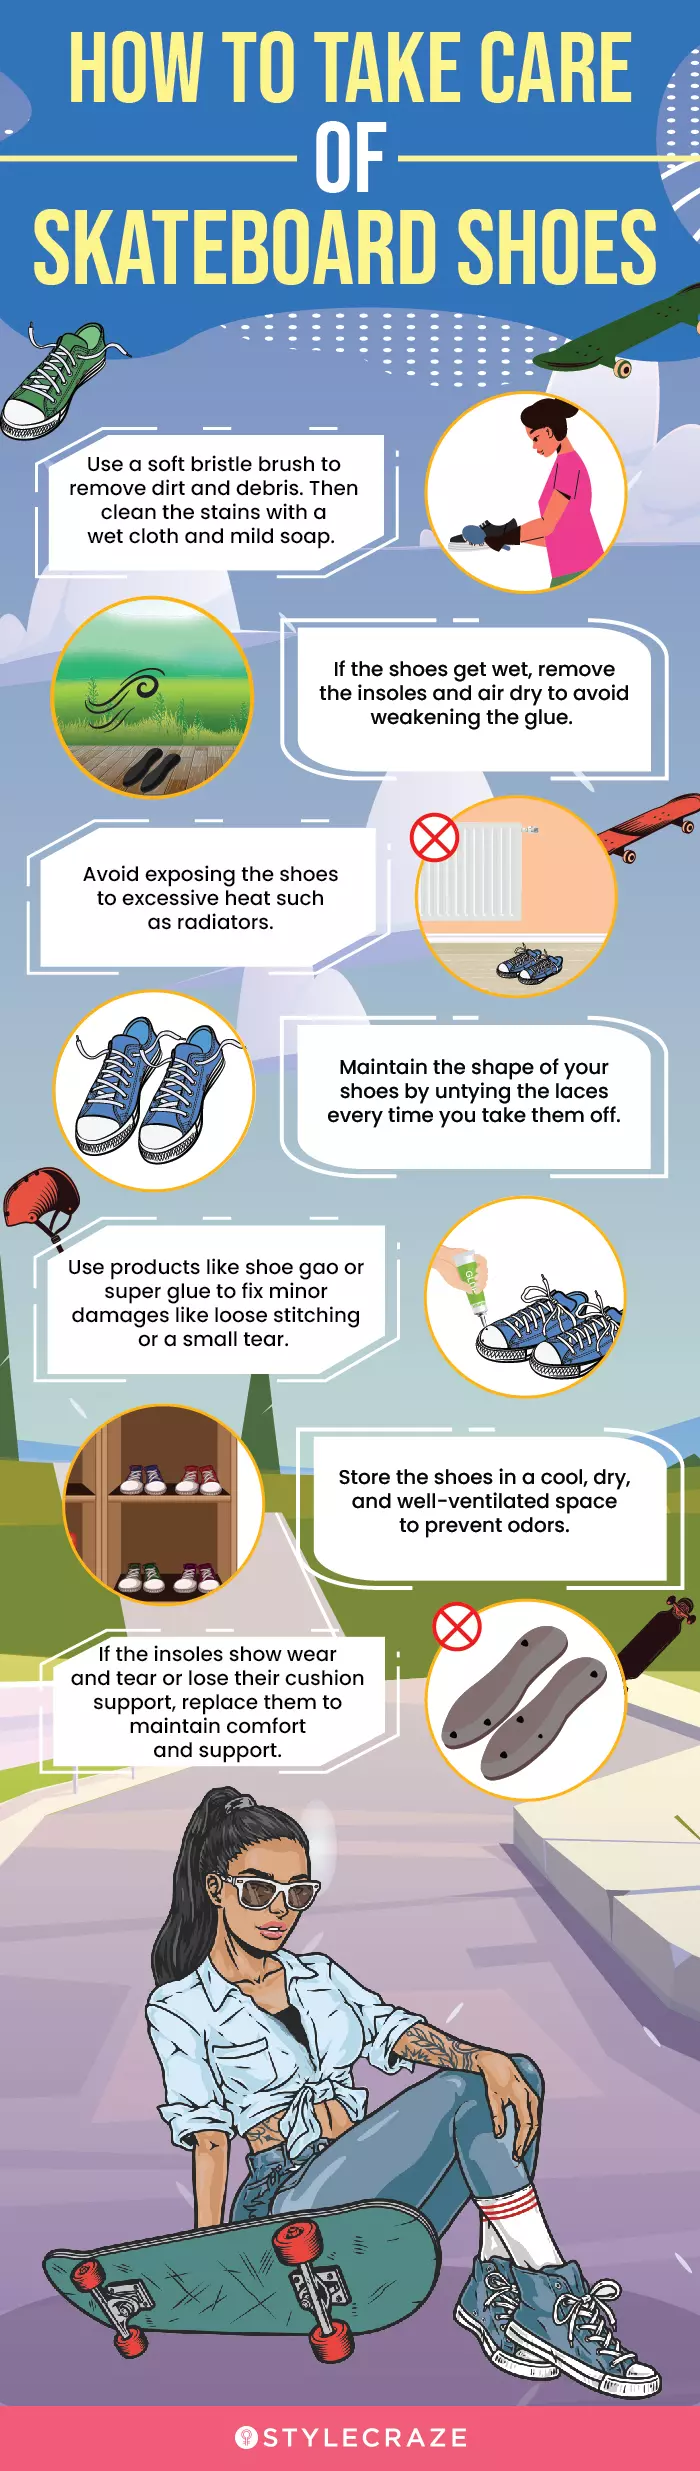 How To Take Care Of Skateboard Shoes (infographic)